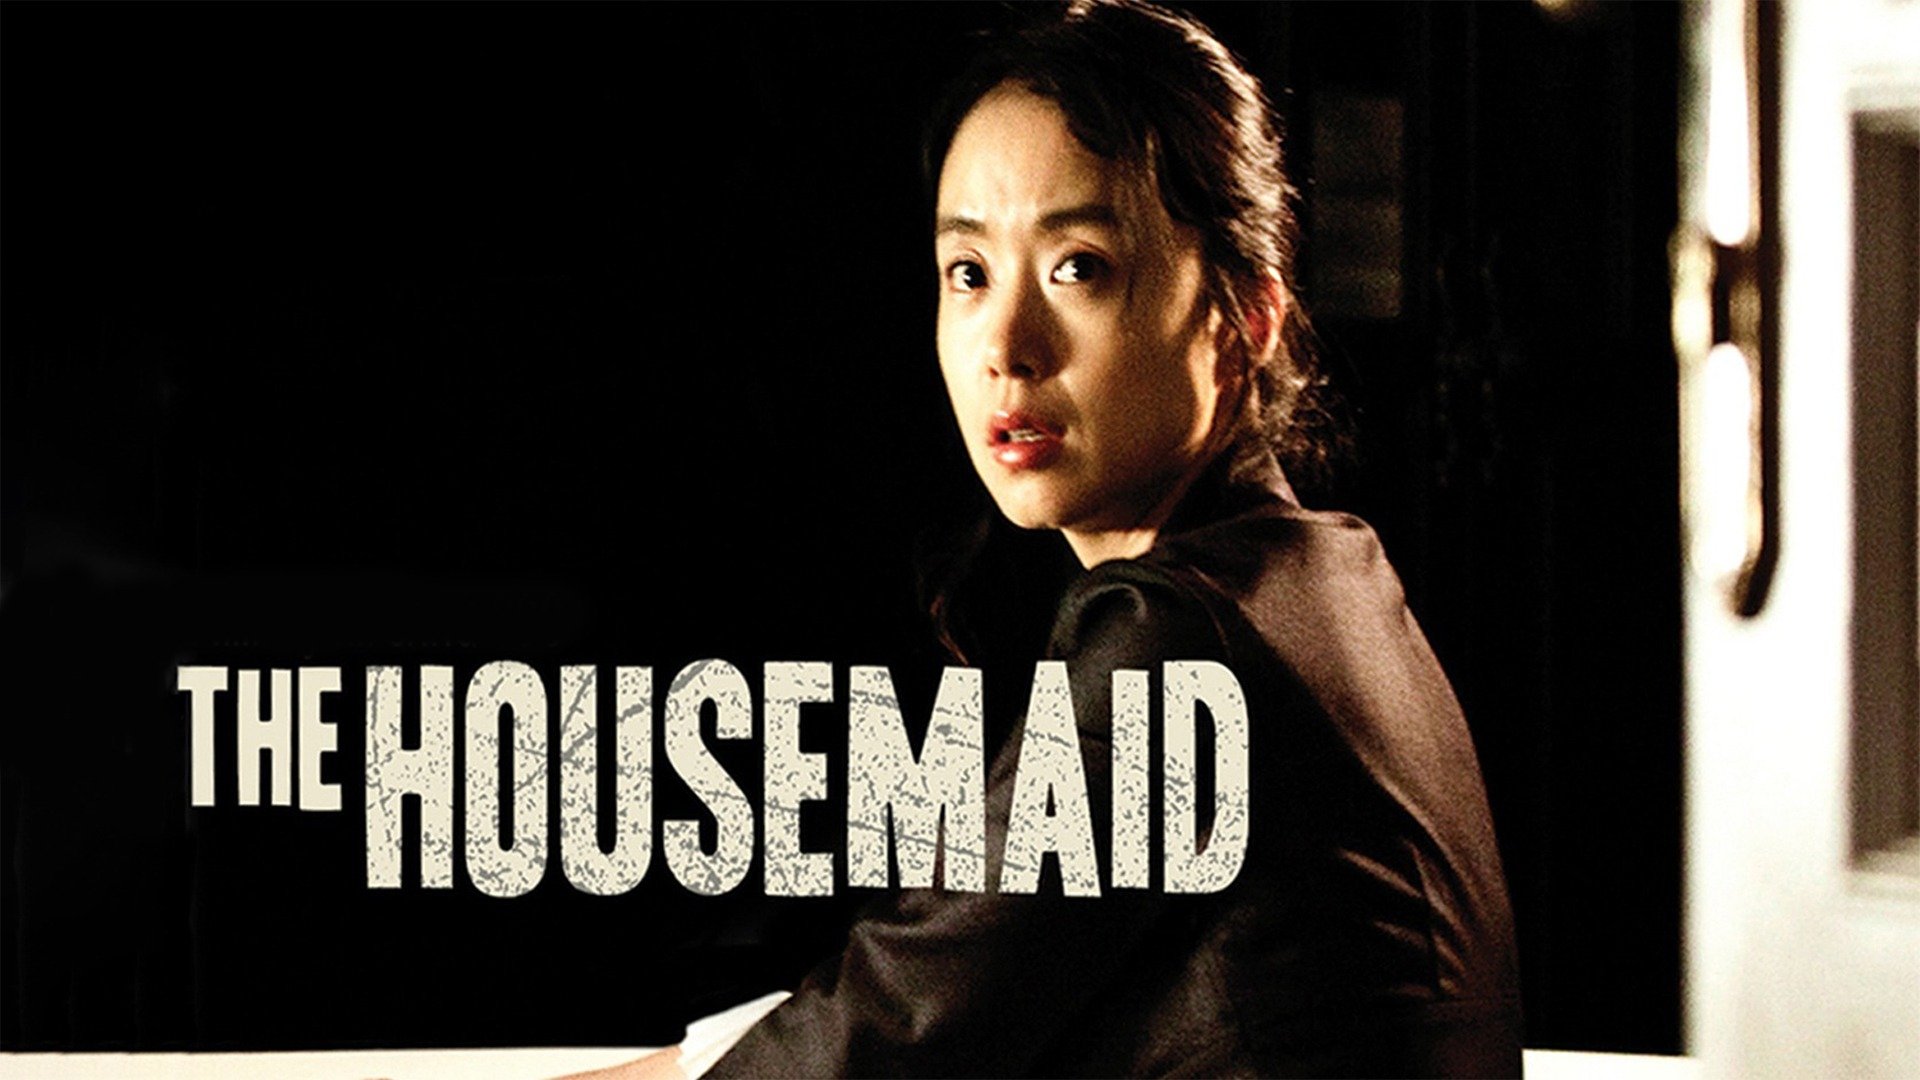 ana bianchi recommends the housemaid movie online pic